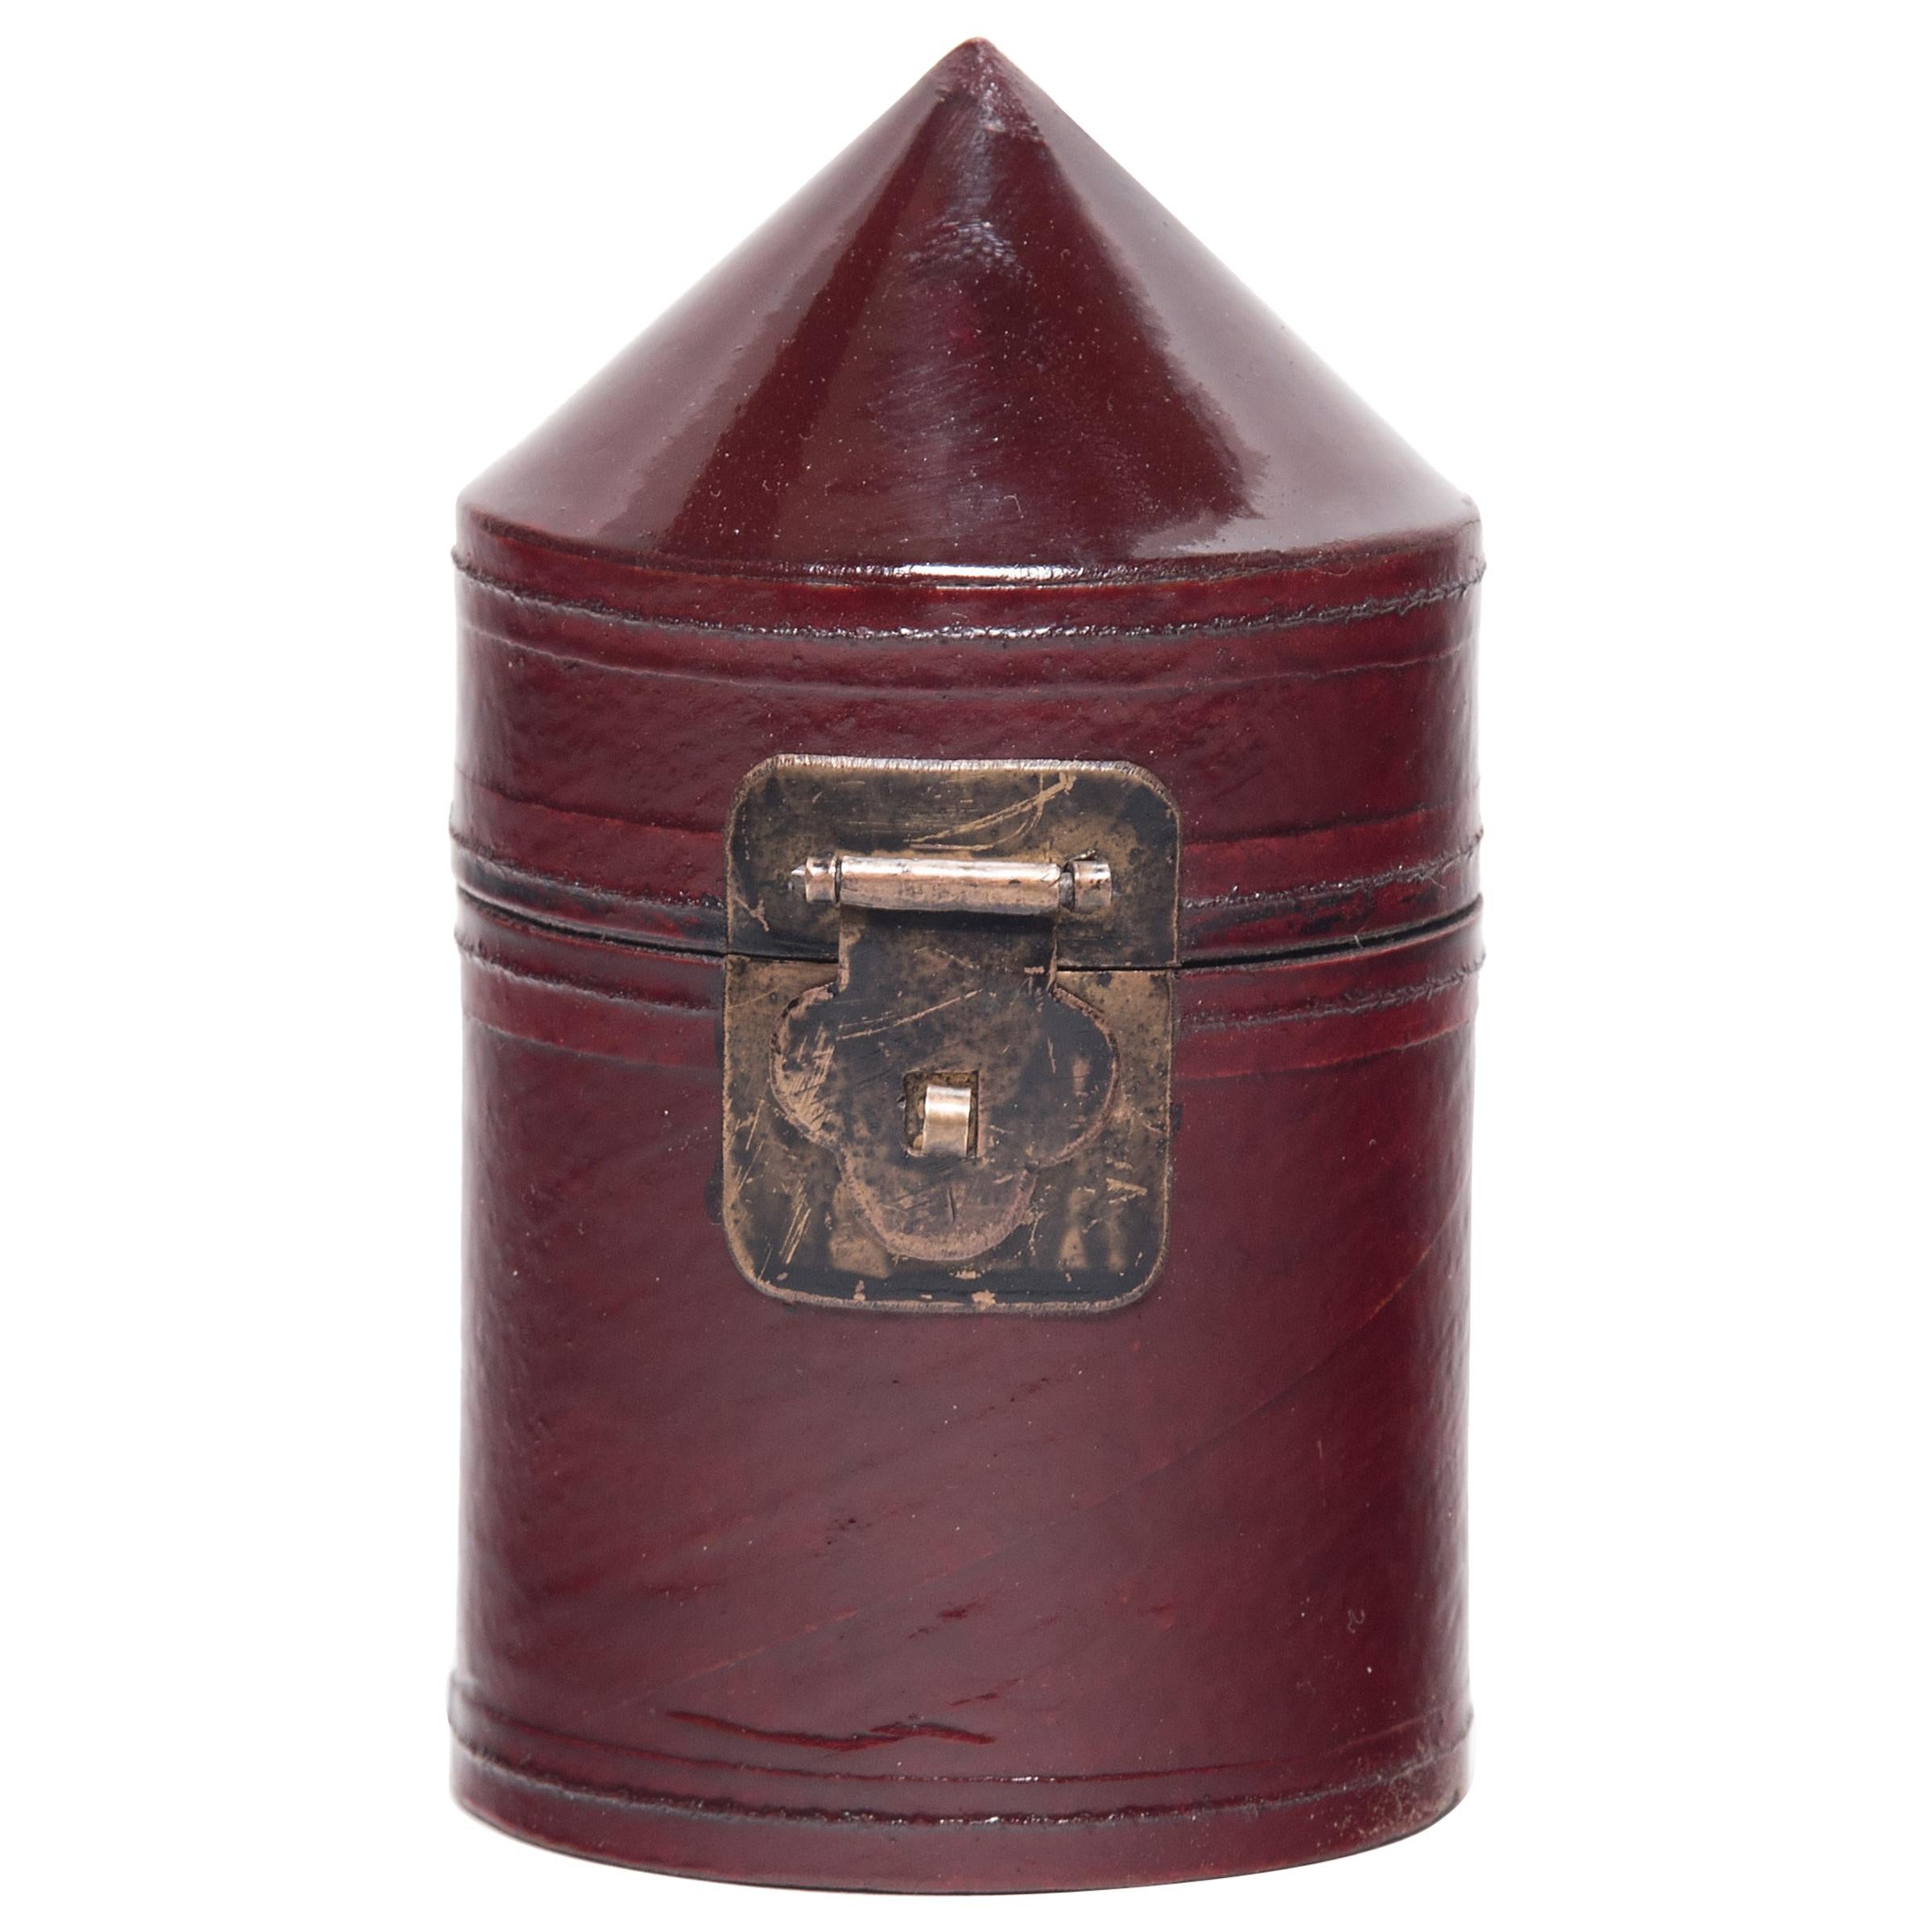 Miniature Chinese Red Lacquer Hat Box, circa 1850